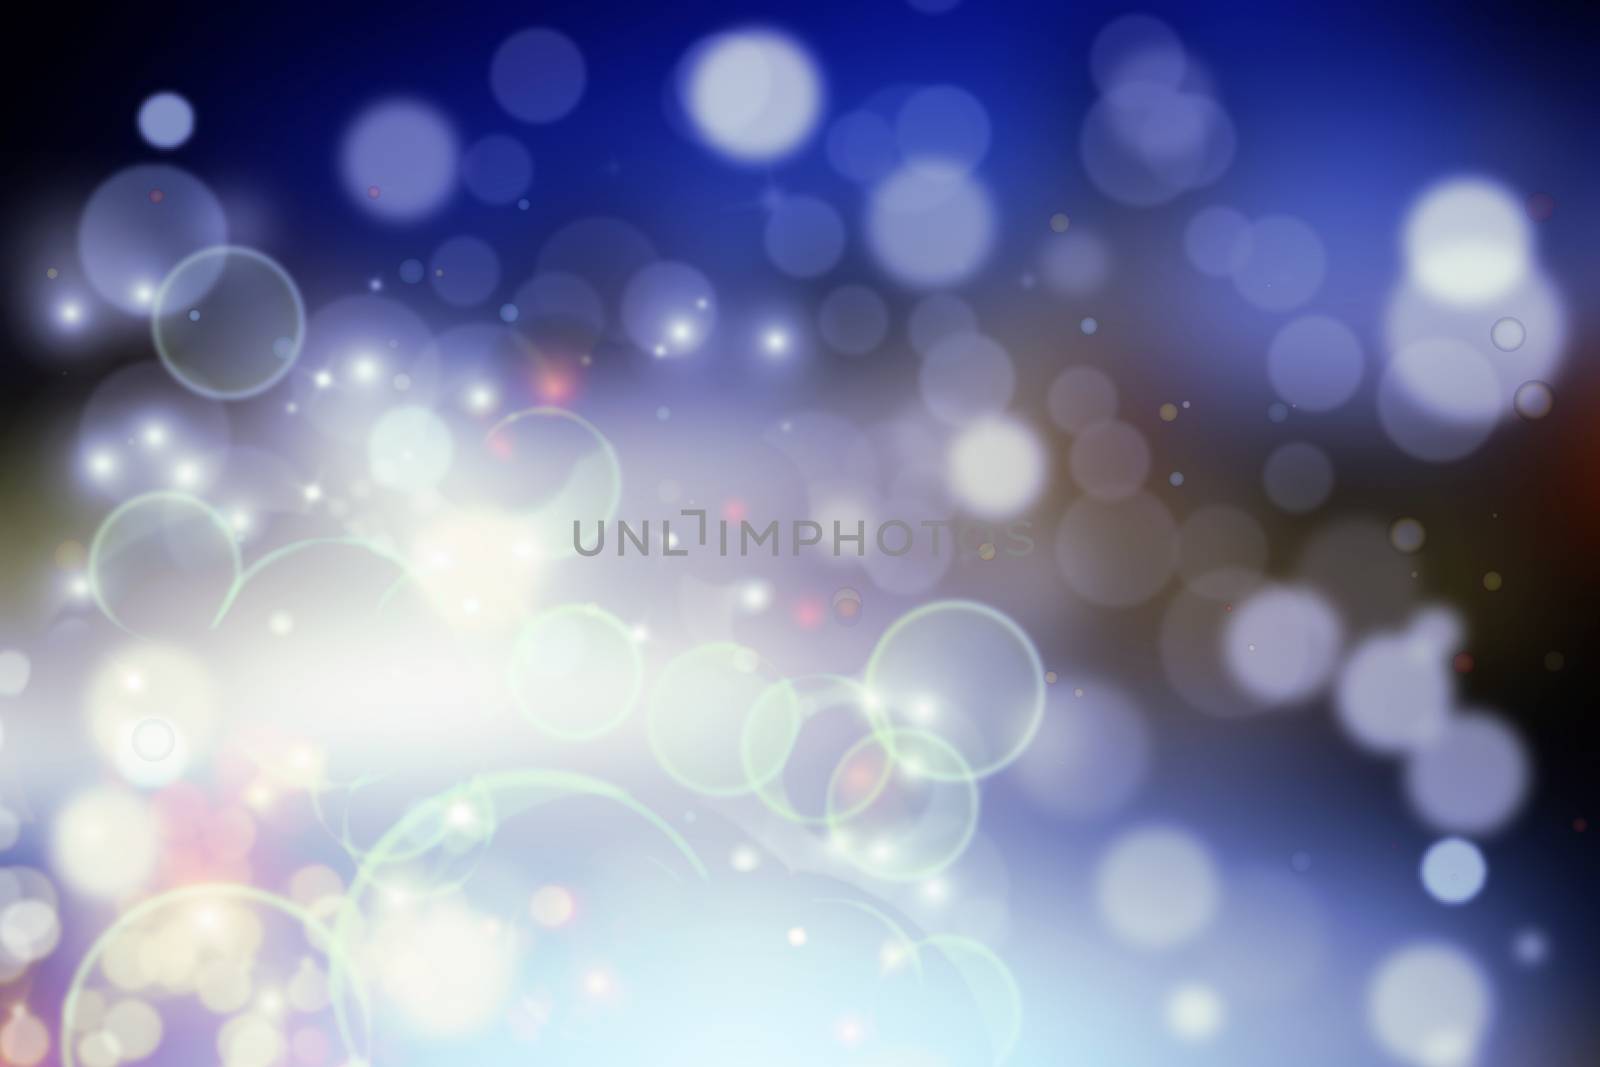 Beautiful bokeh made of blurred lights on colorfull background, Abstract defocused colorful blurred background. Abstract light background